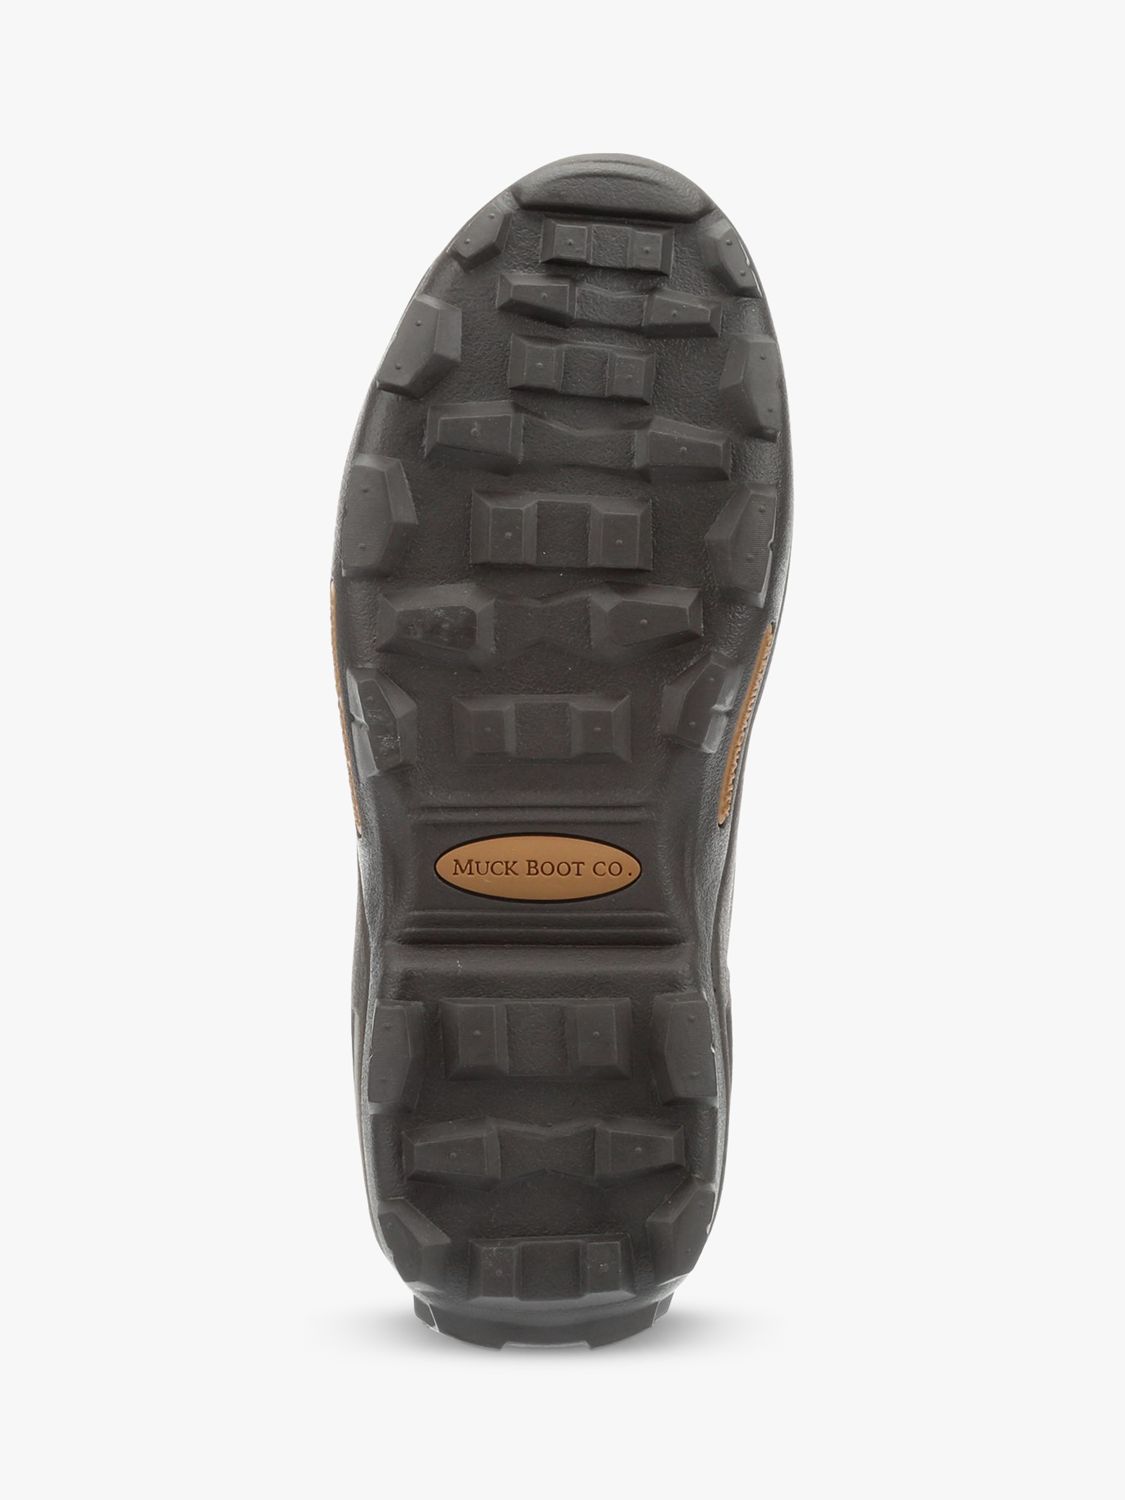 Buy Muck Woody Max Cold-Conditions Hunting Boots, Moss Online at johnlewis.com